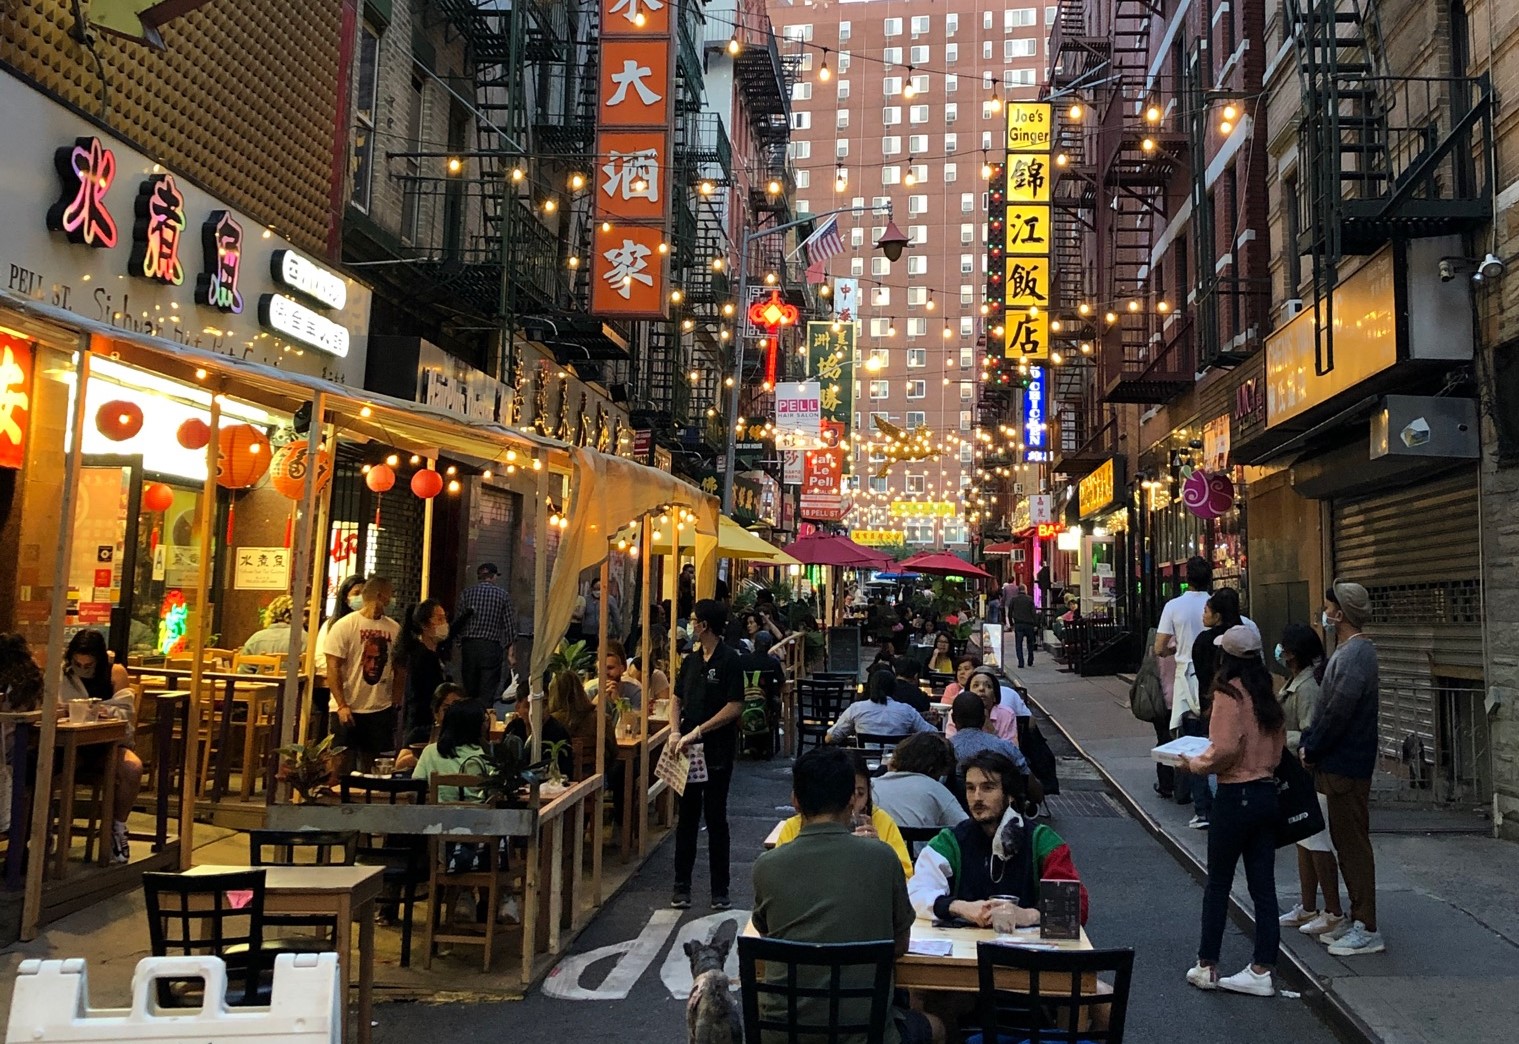 People sitting at tables set up outside businesses on a street in Chinatown that has been closed to traffic